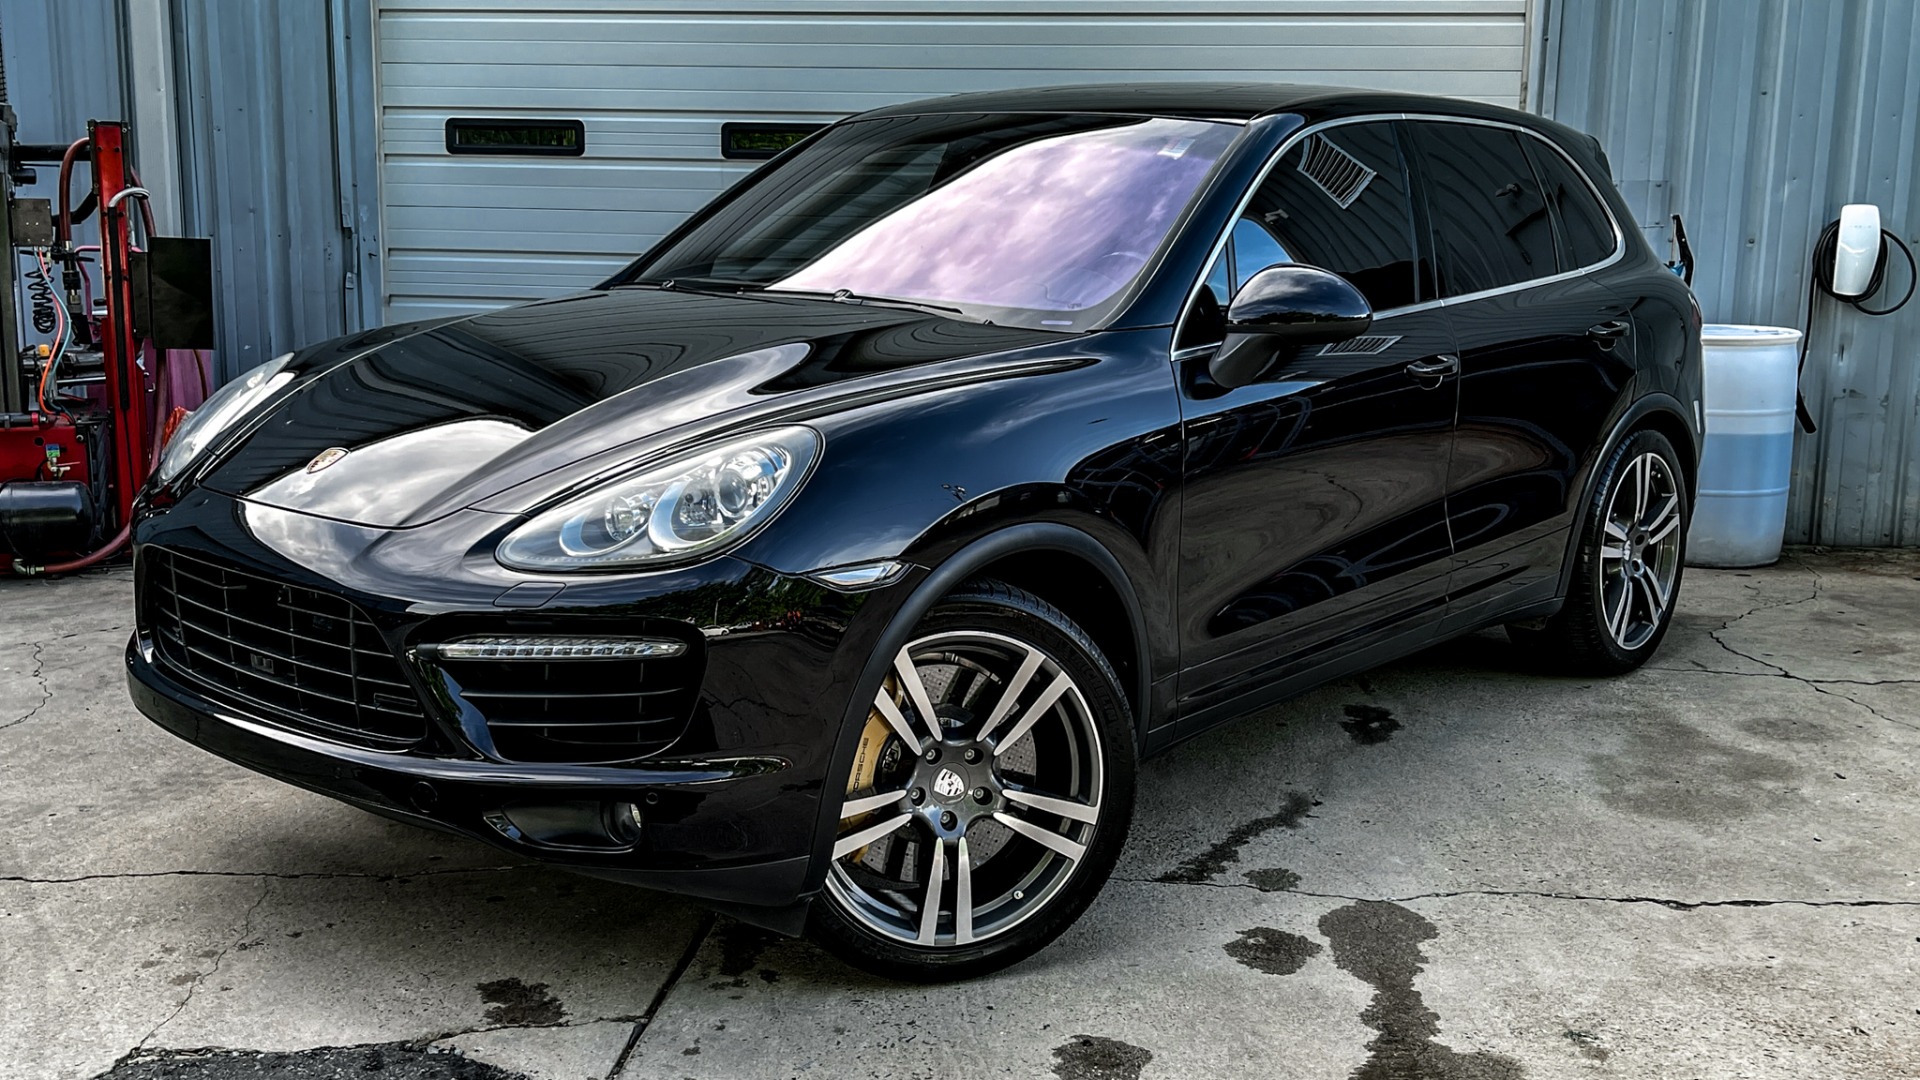 Used 2011 Porsche Cayenne Turbo / CARBON CERAMICS / CARBON FIBER TRIM / 21IN WHEELS / PREMIUM PACKAGE for sale $30,900 at Formula Imports in Charlotte NC 28227 69